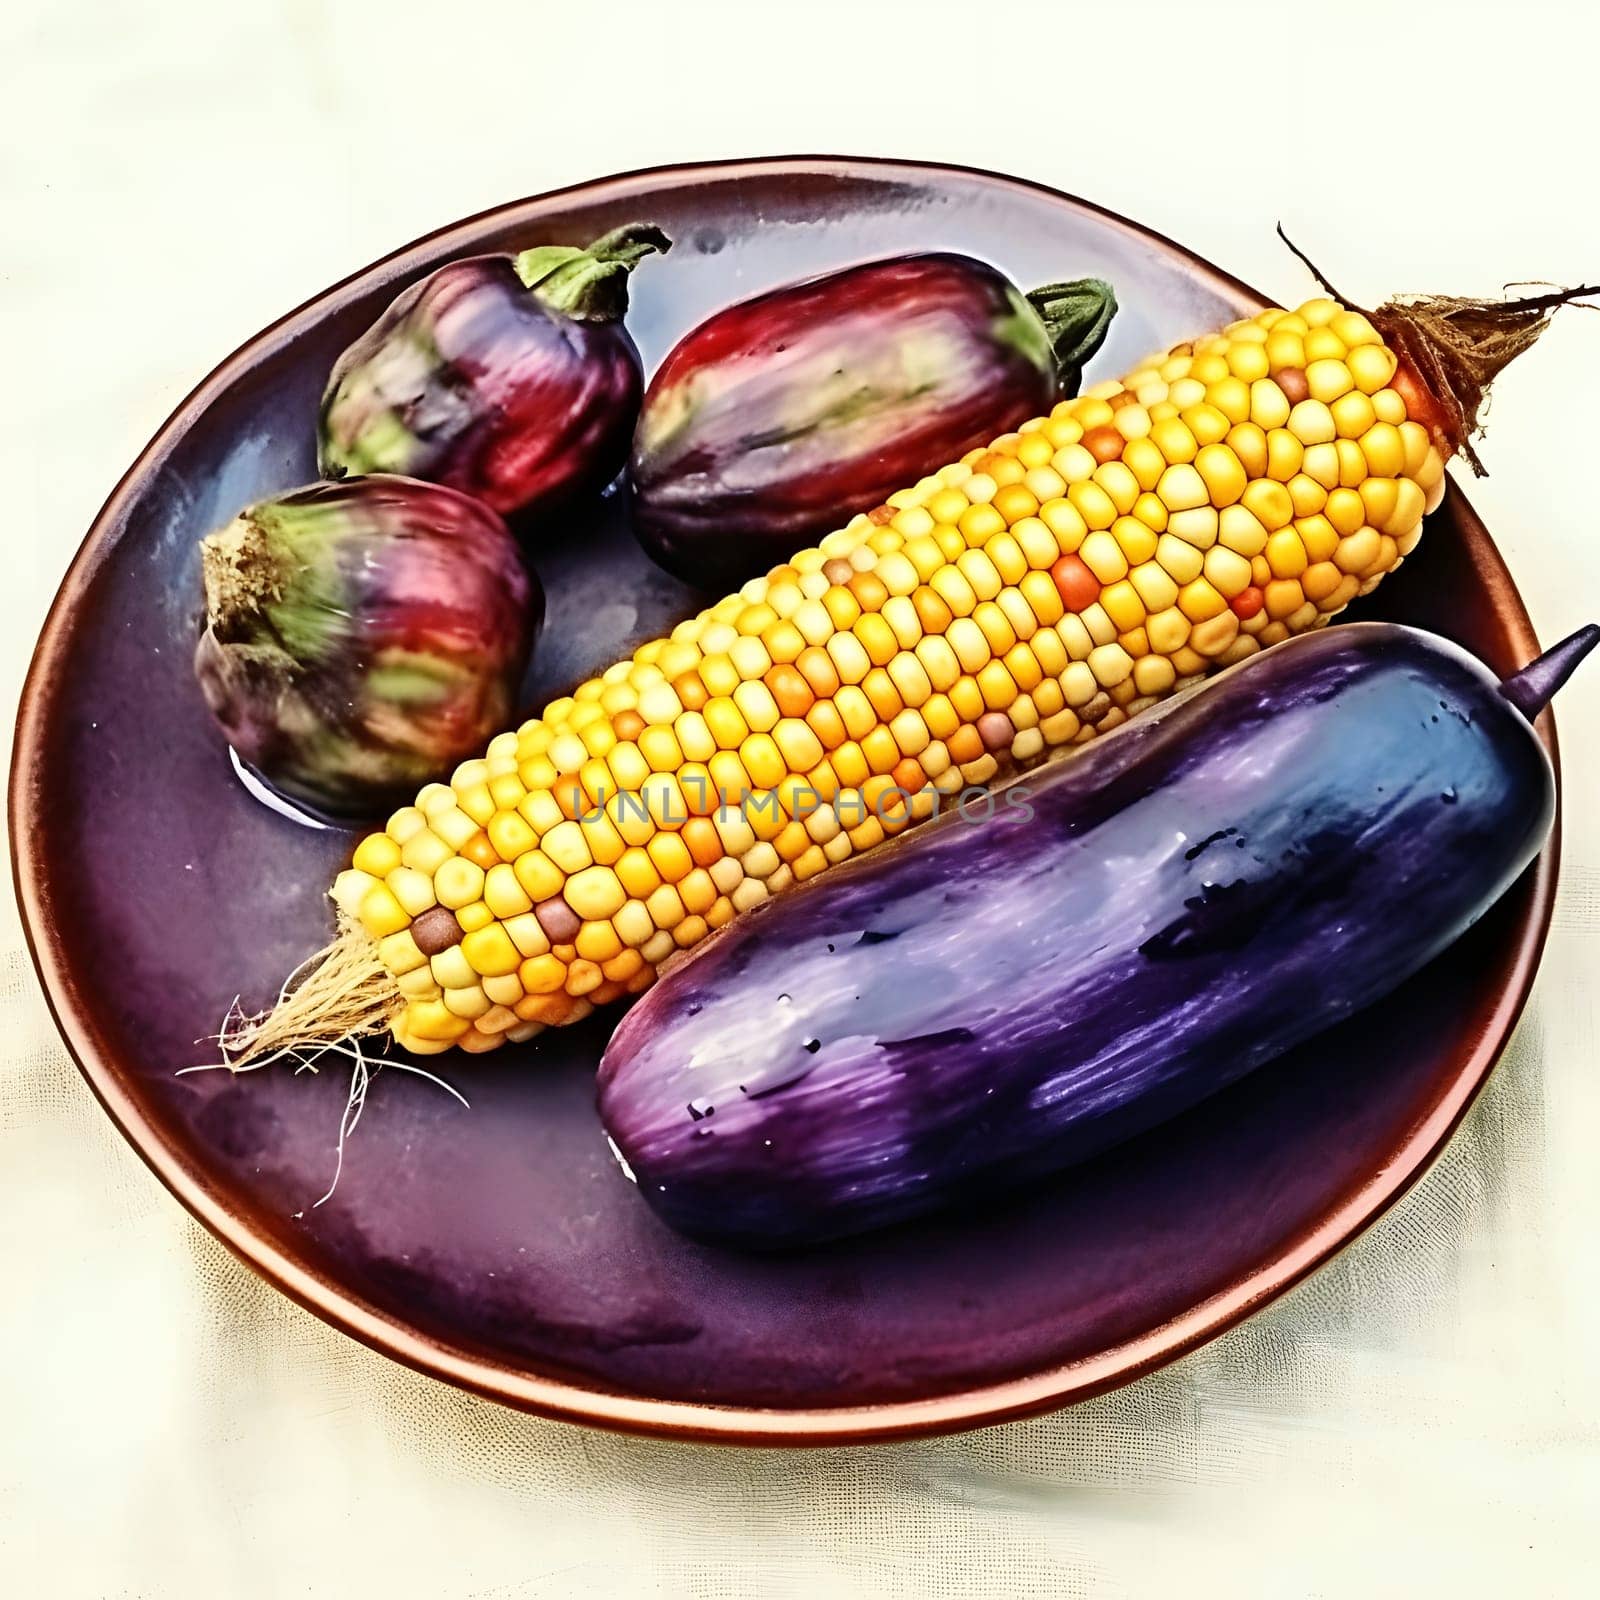 Eggplants and corn cob on a plate. Corn as a dish of thanksgiving for the harvest. An atmosphere of joy and celebration.